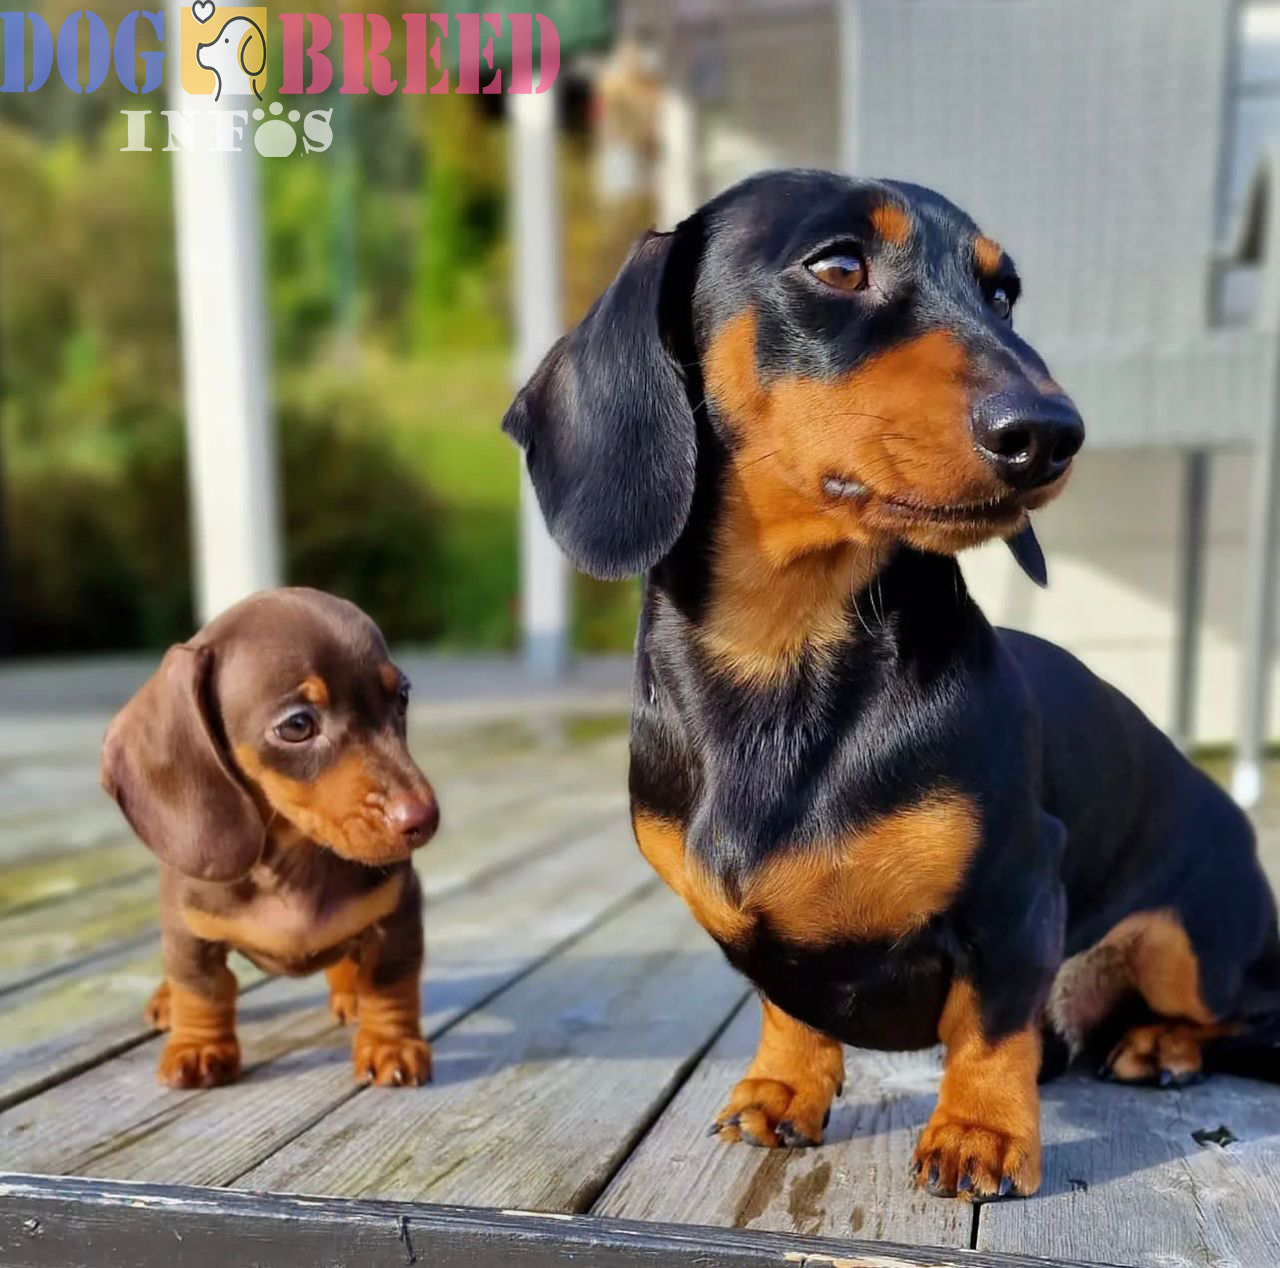 Dachshunds: Small in Size, Big in Personality and History